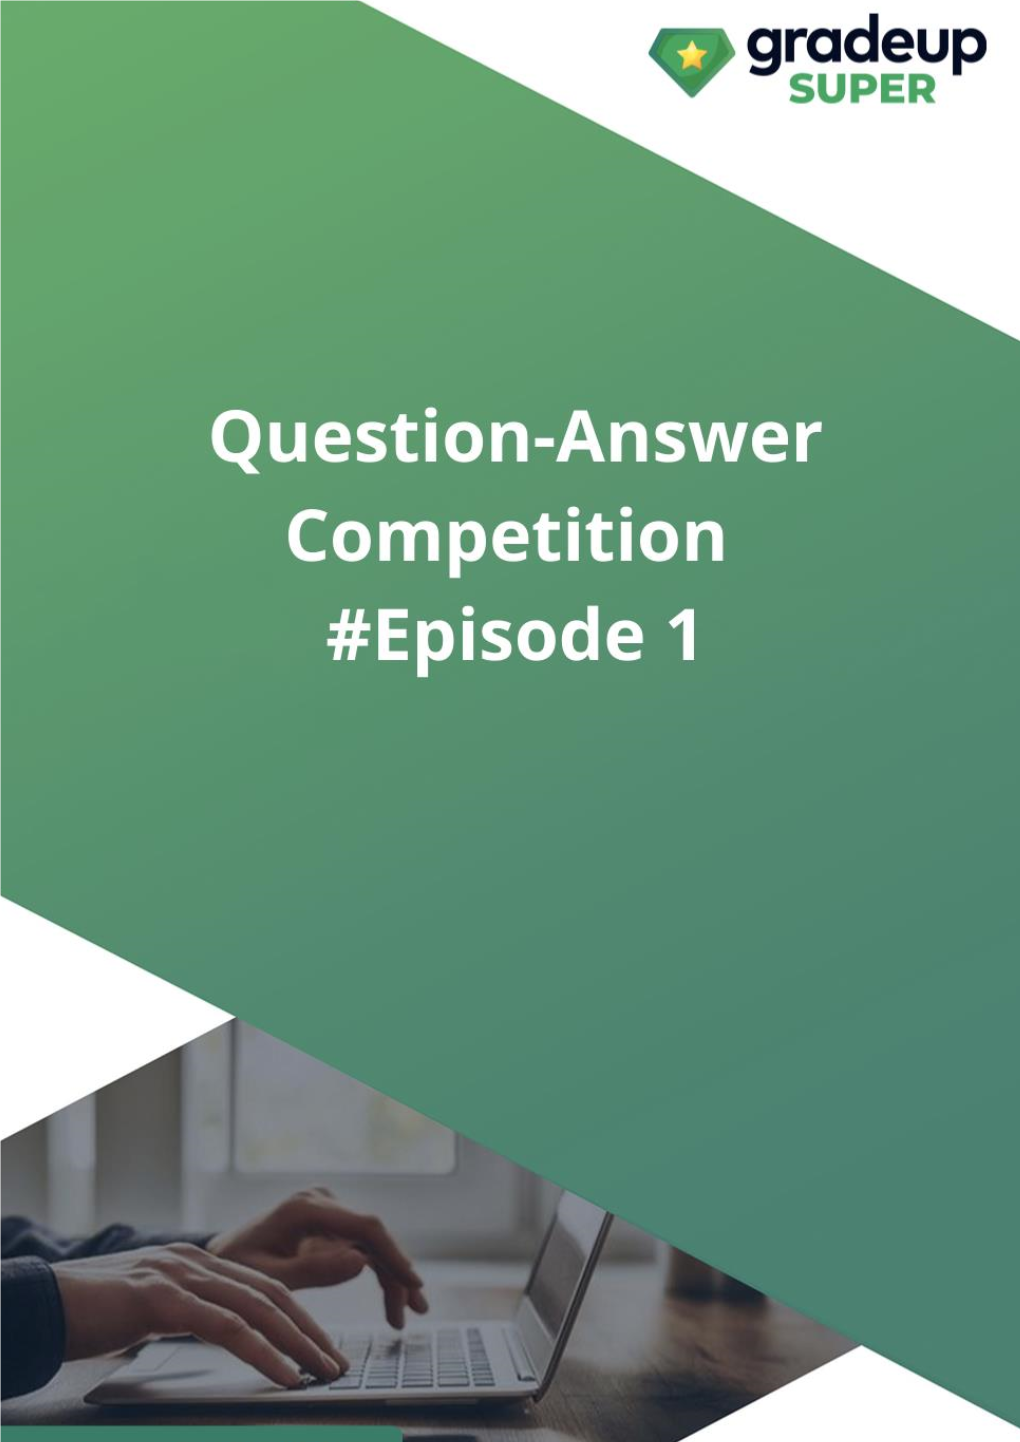 Question-Answer Competition PDF of Episode 1